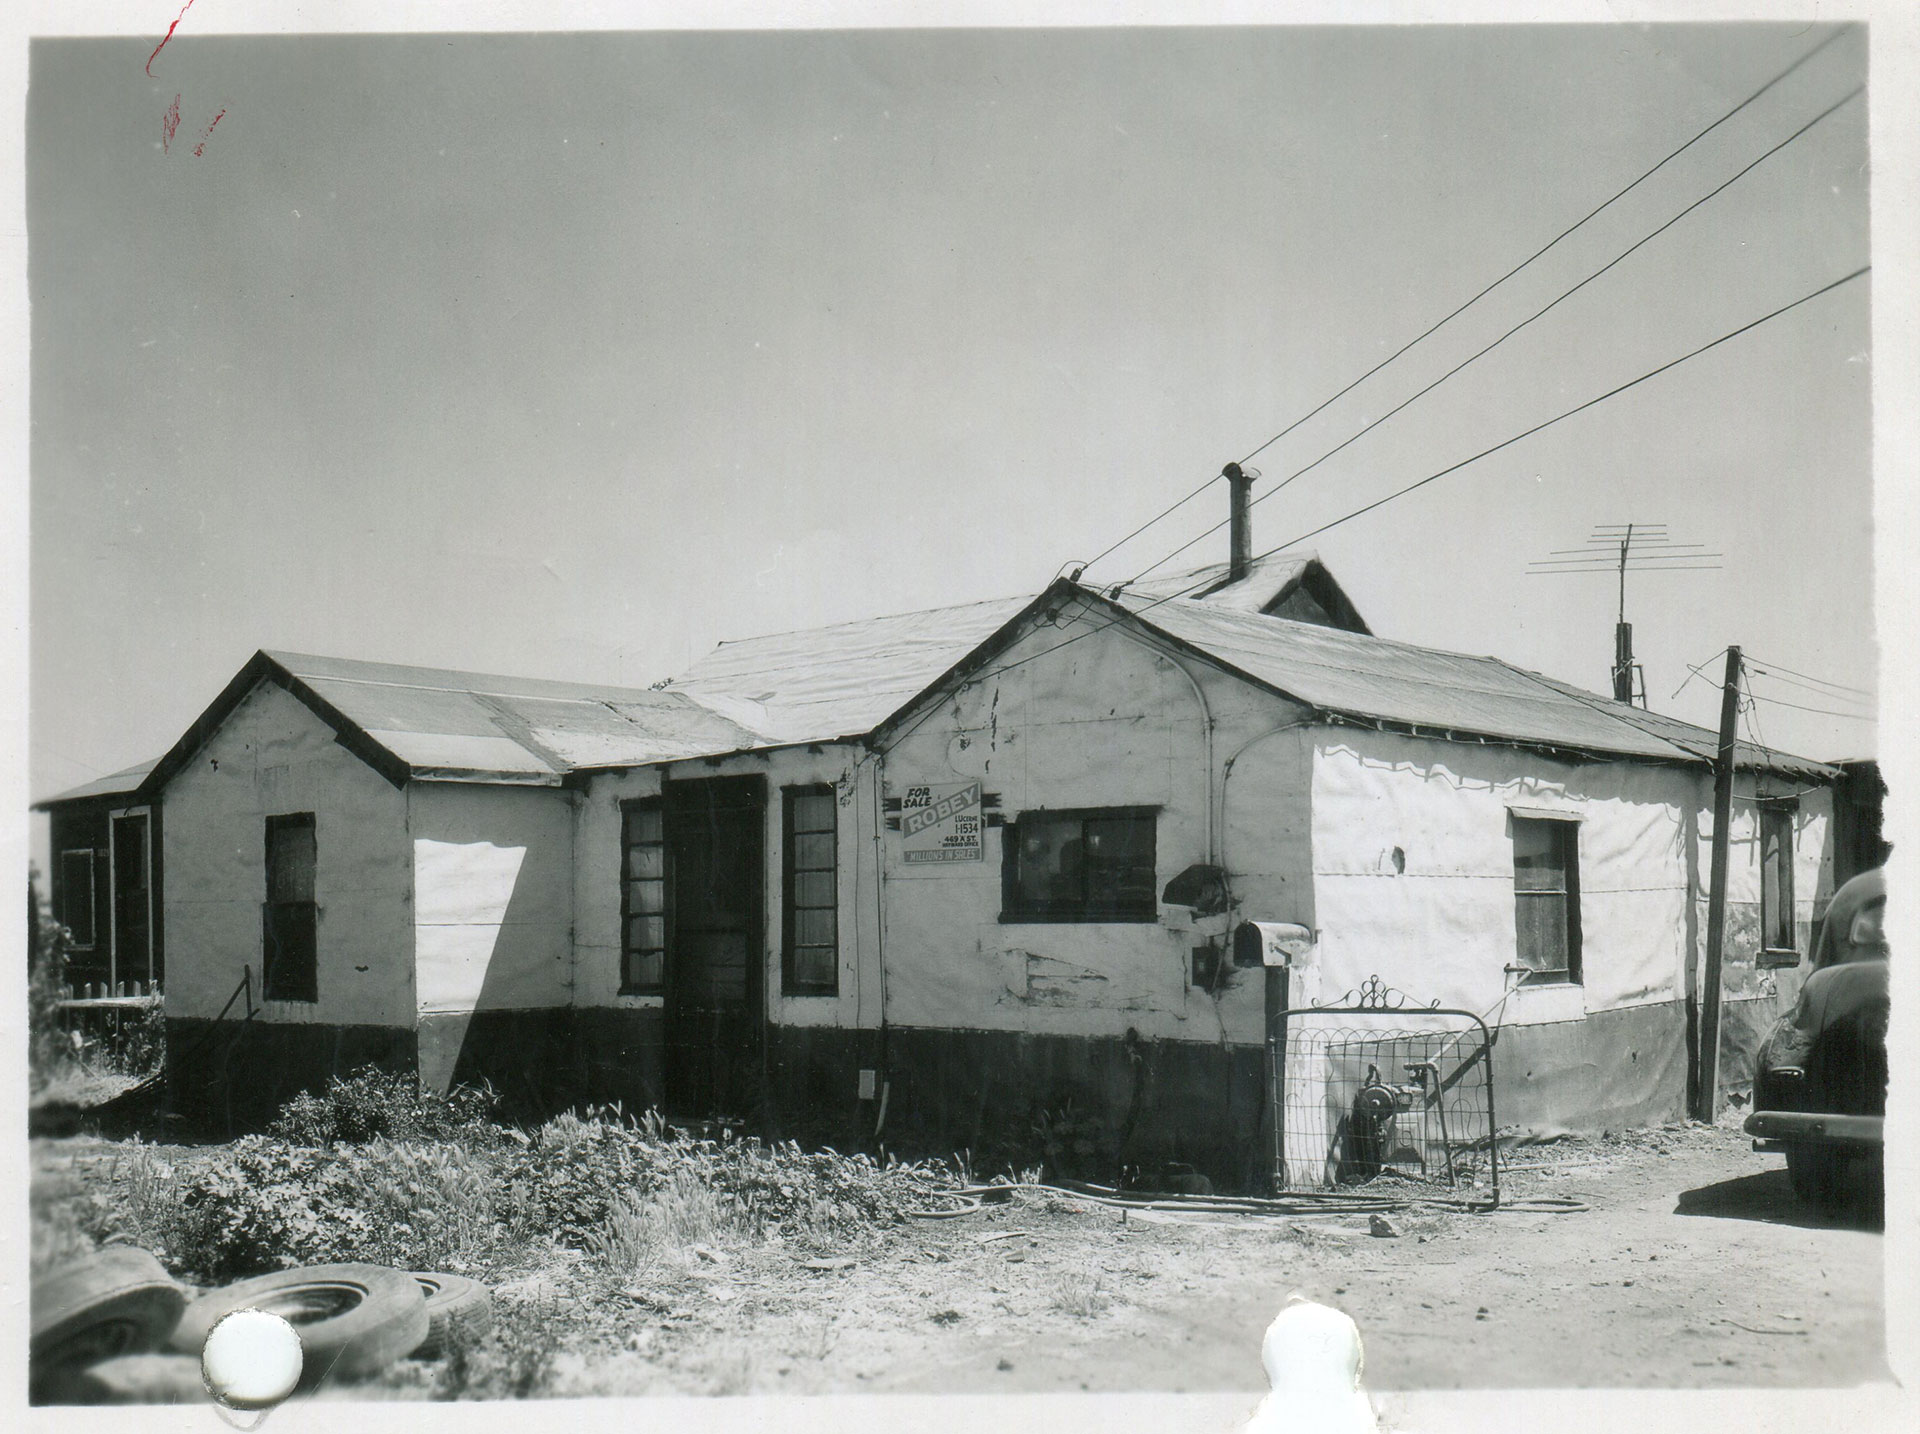 Black and white photo of a small house with paper siding, a pile of tires out front, a dusty yard and a for sale sign.